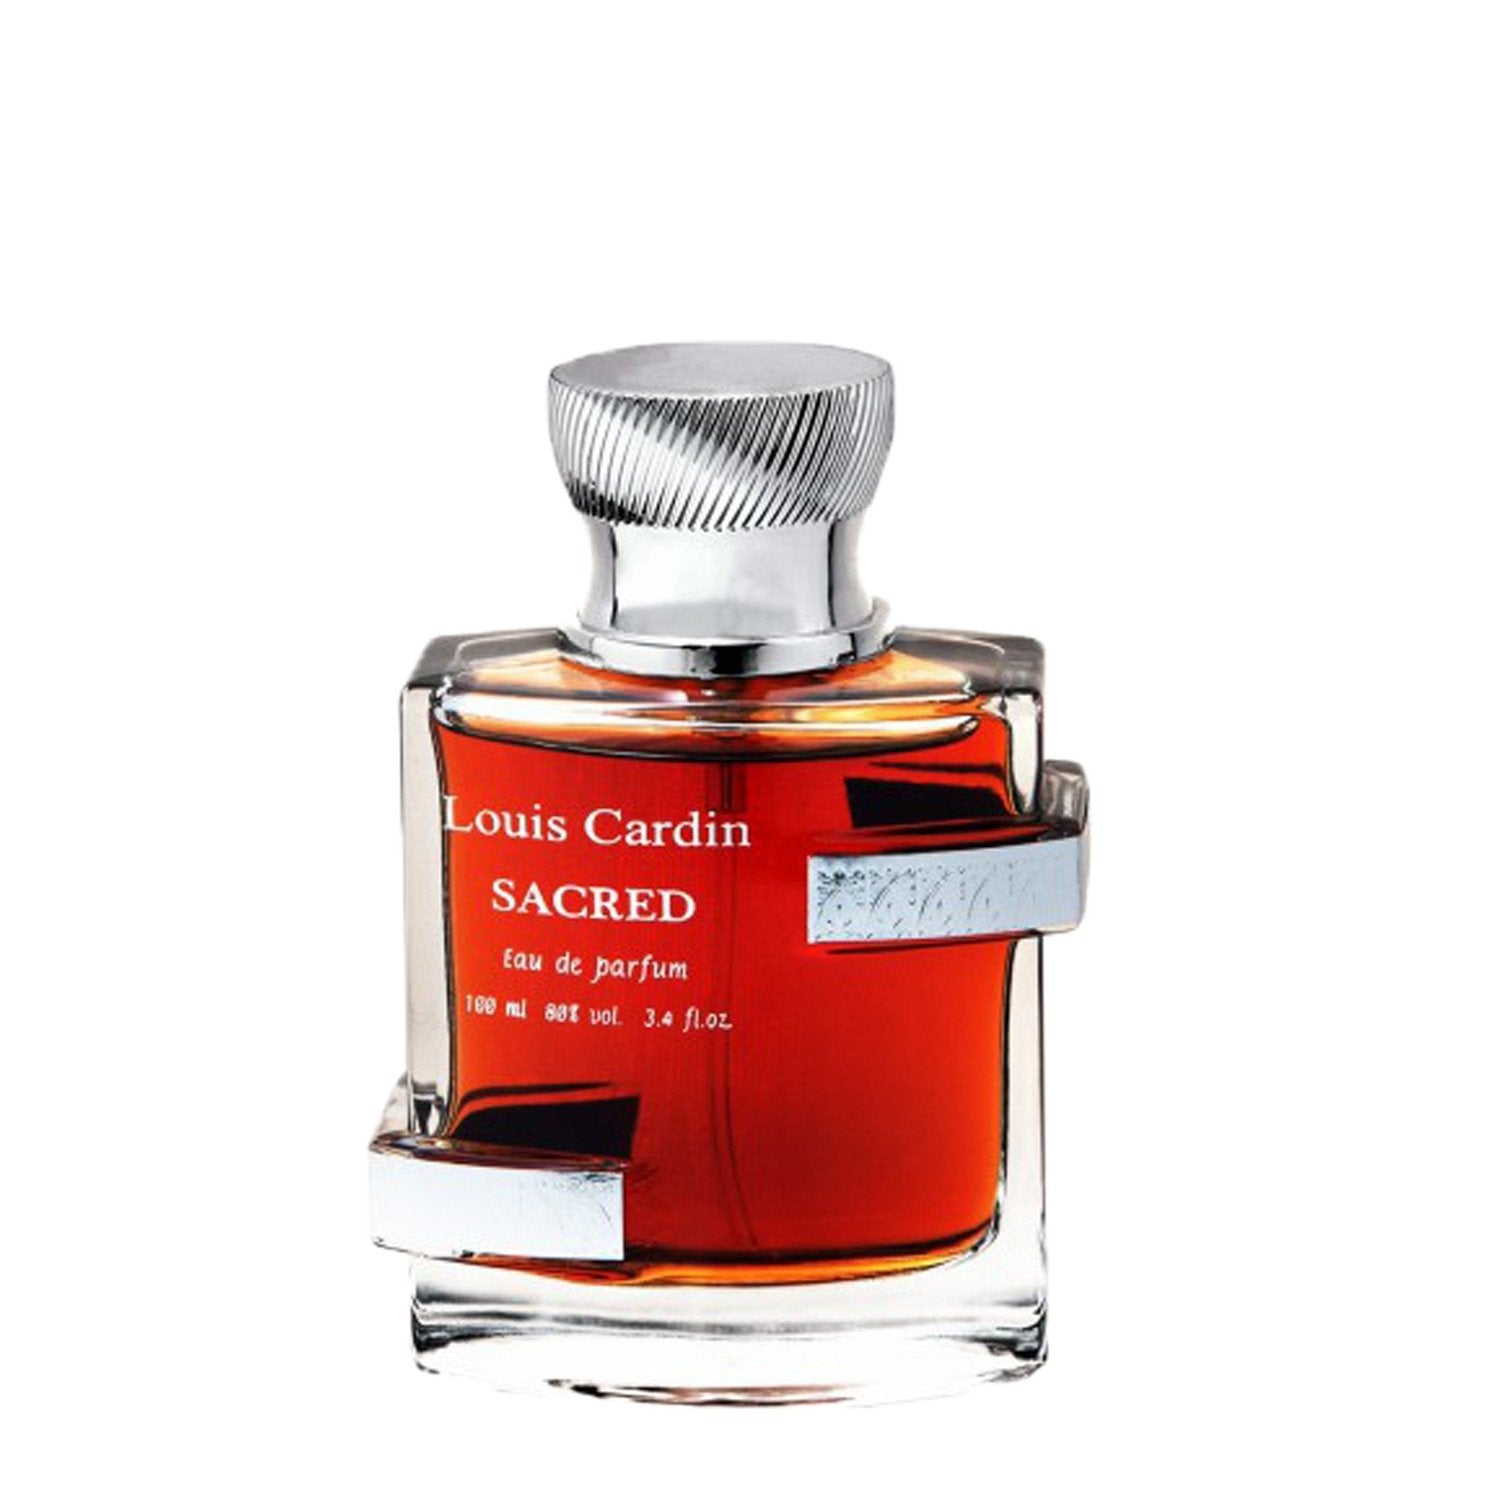 Louis Cardin Perfumes - The Credible Series from Louis Cardin The